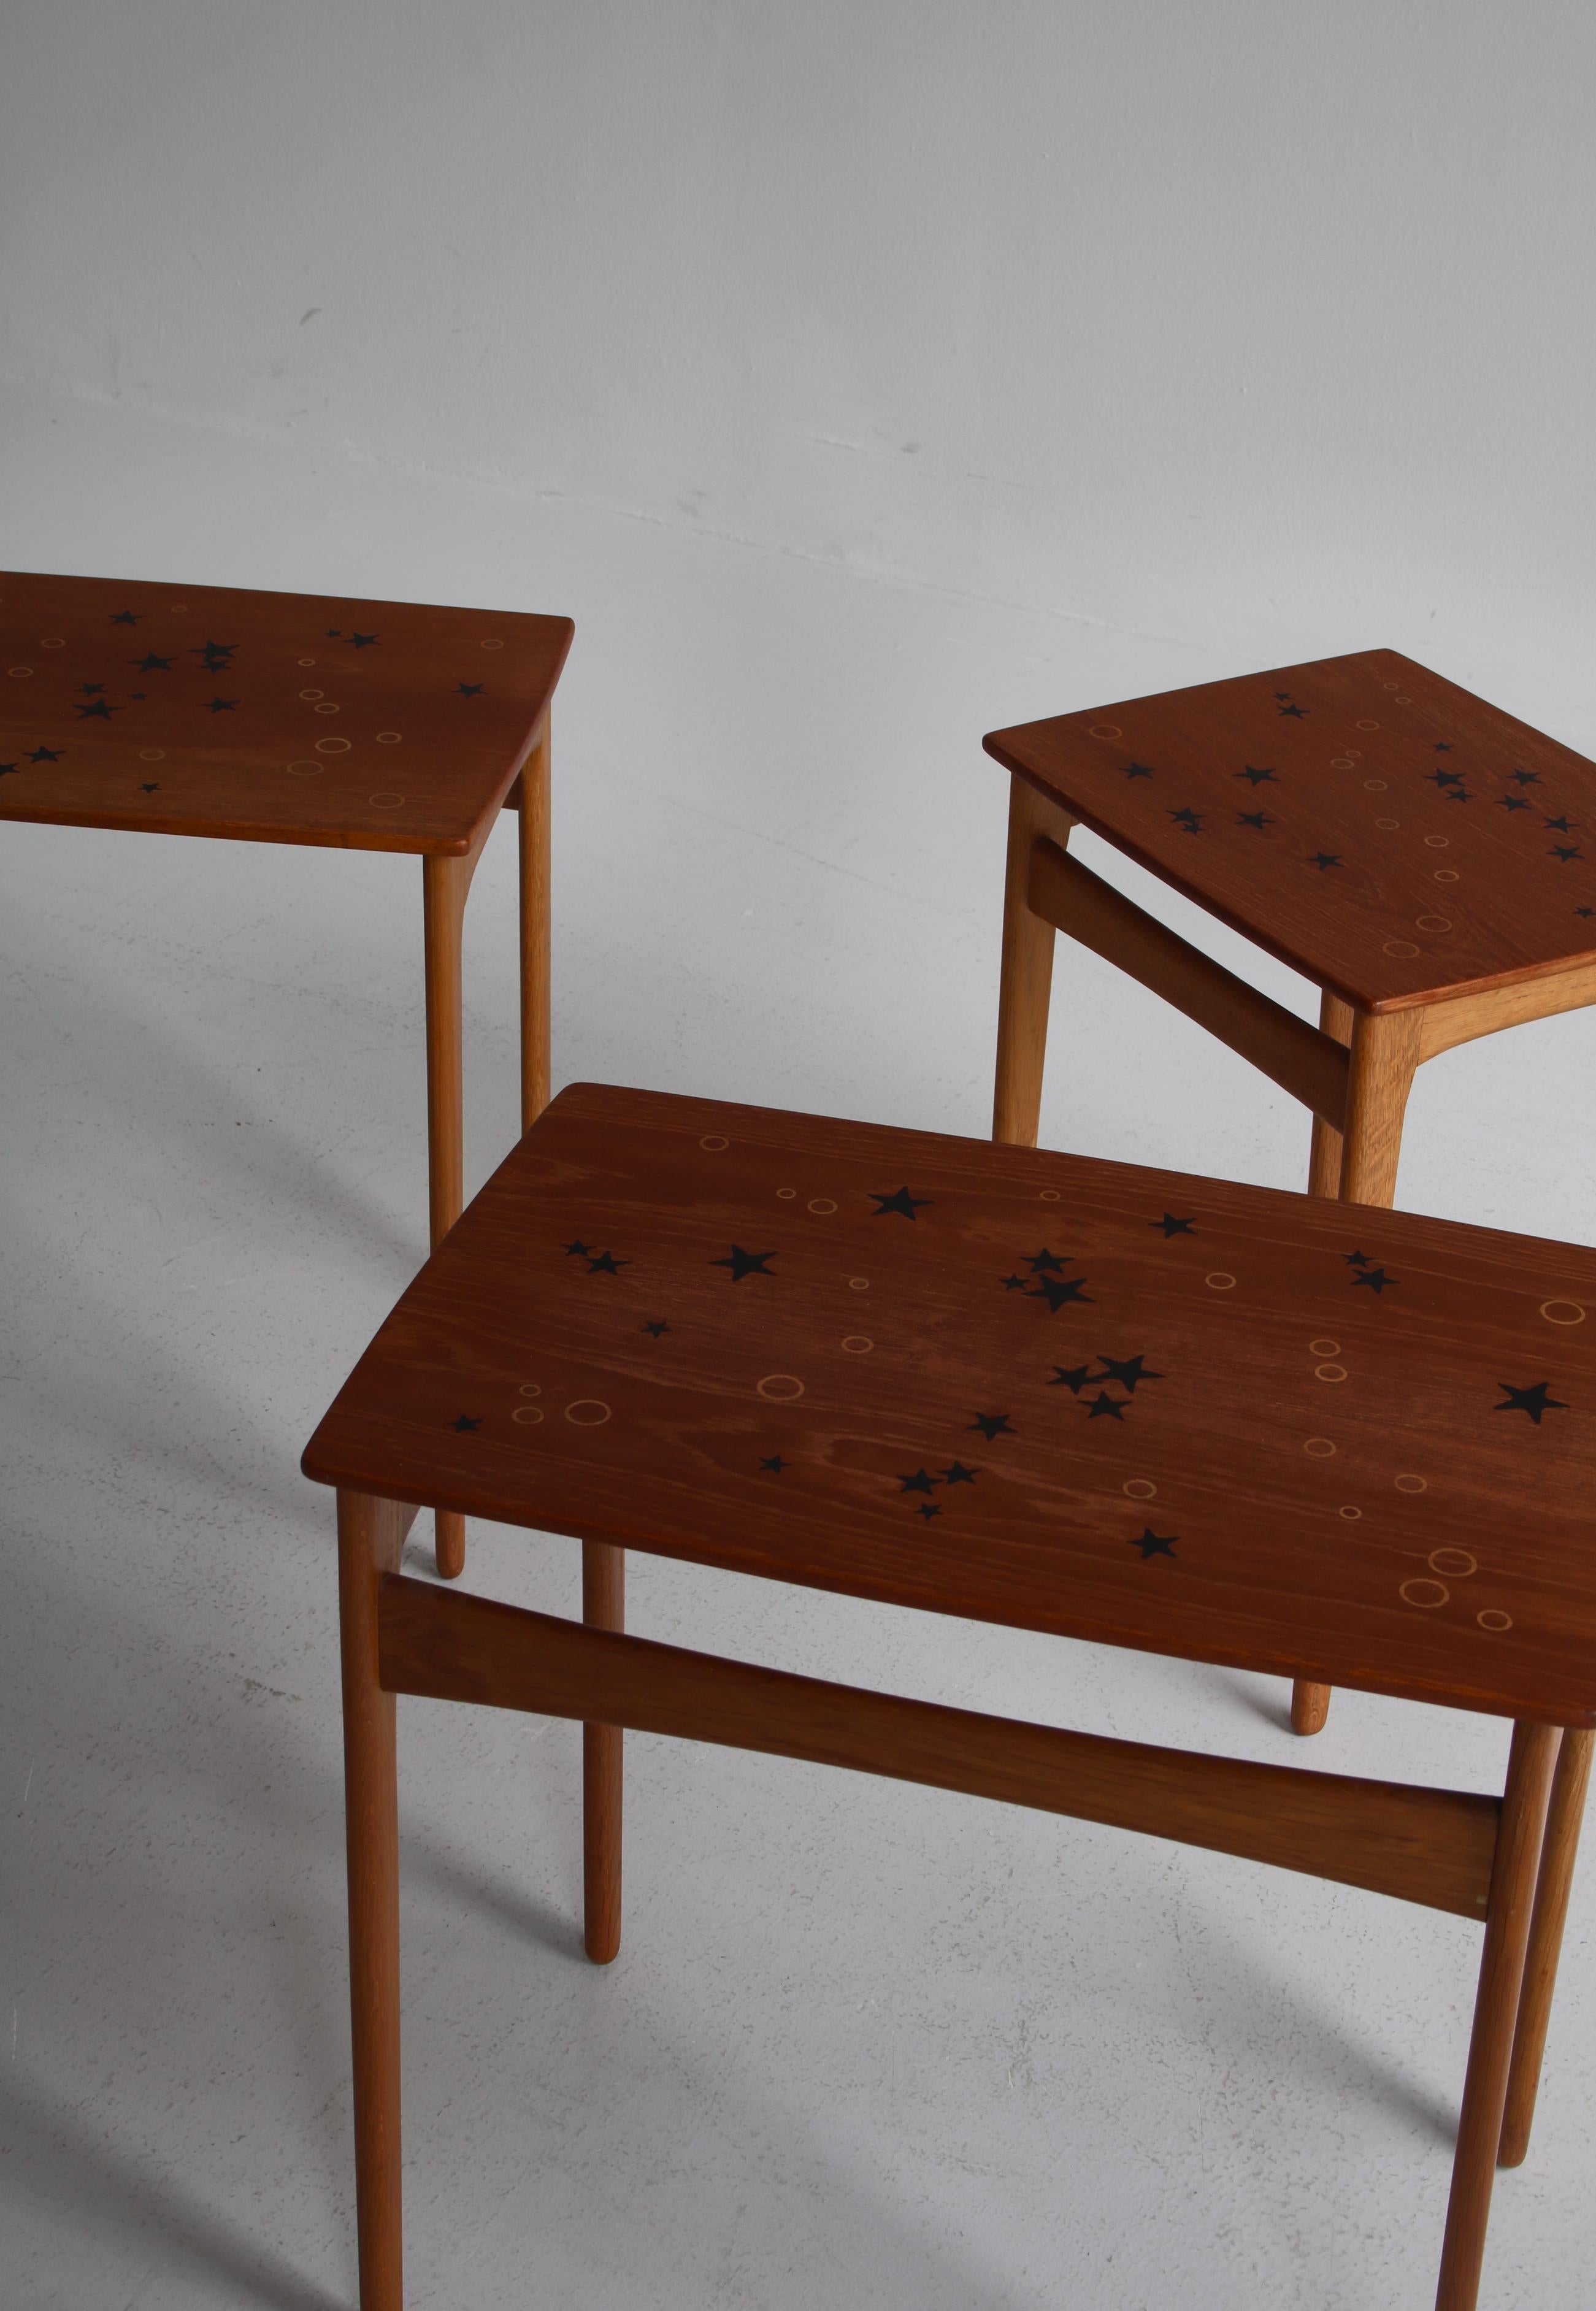 Nesting Tables in Teak and oak by Svend Aage Madsen, Denmark, 1950s For Sale 4